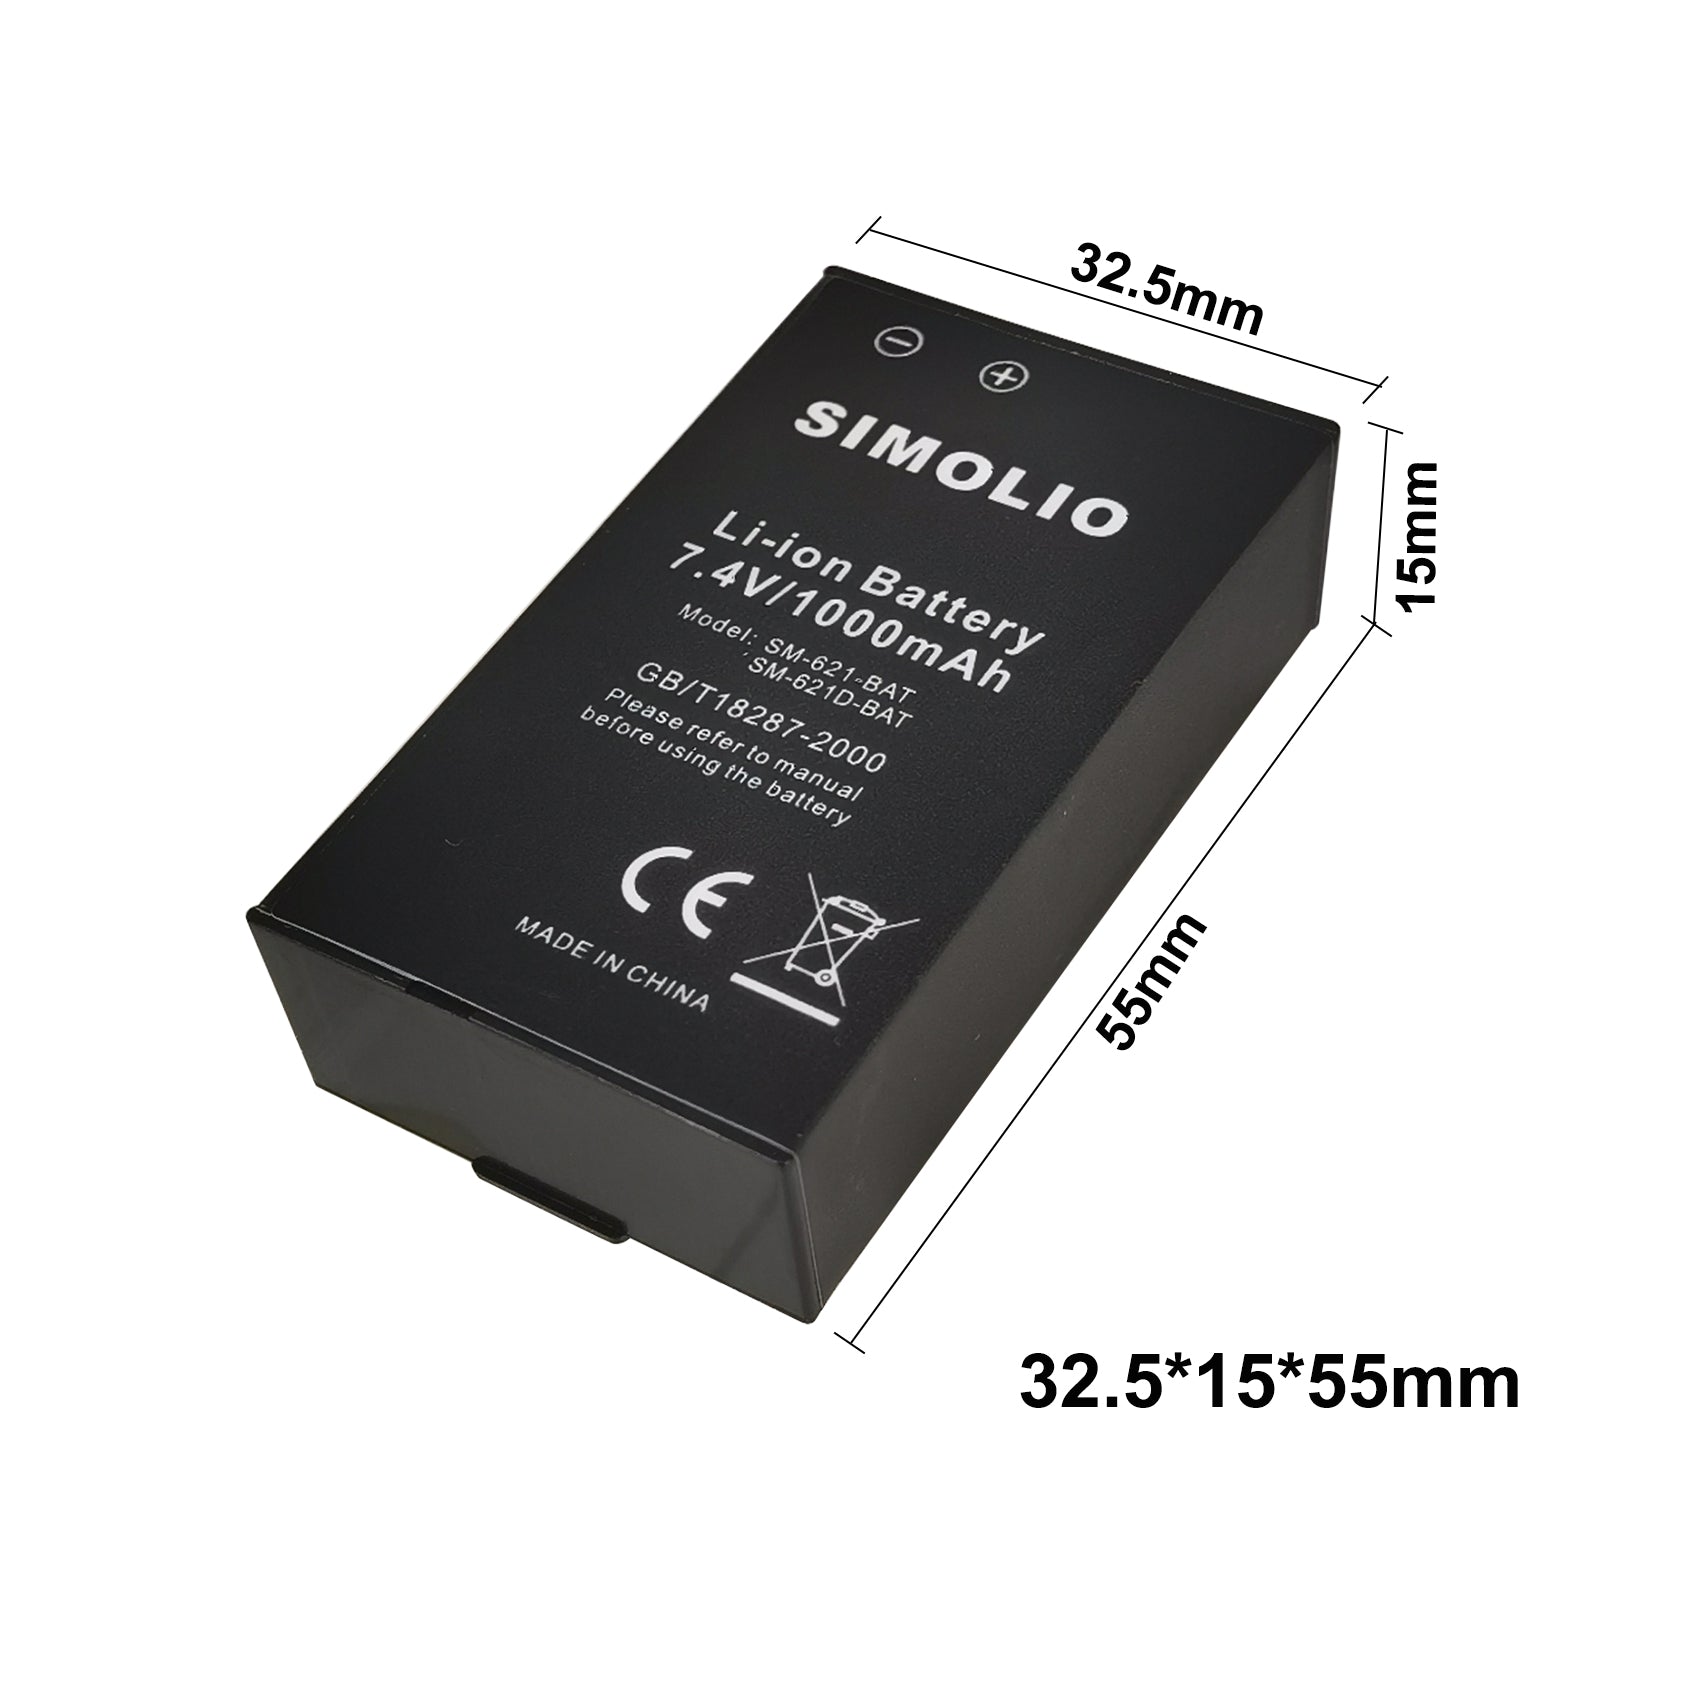 SIMOLIO rechargeable battery for portable tv speakers specification